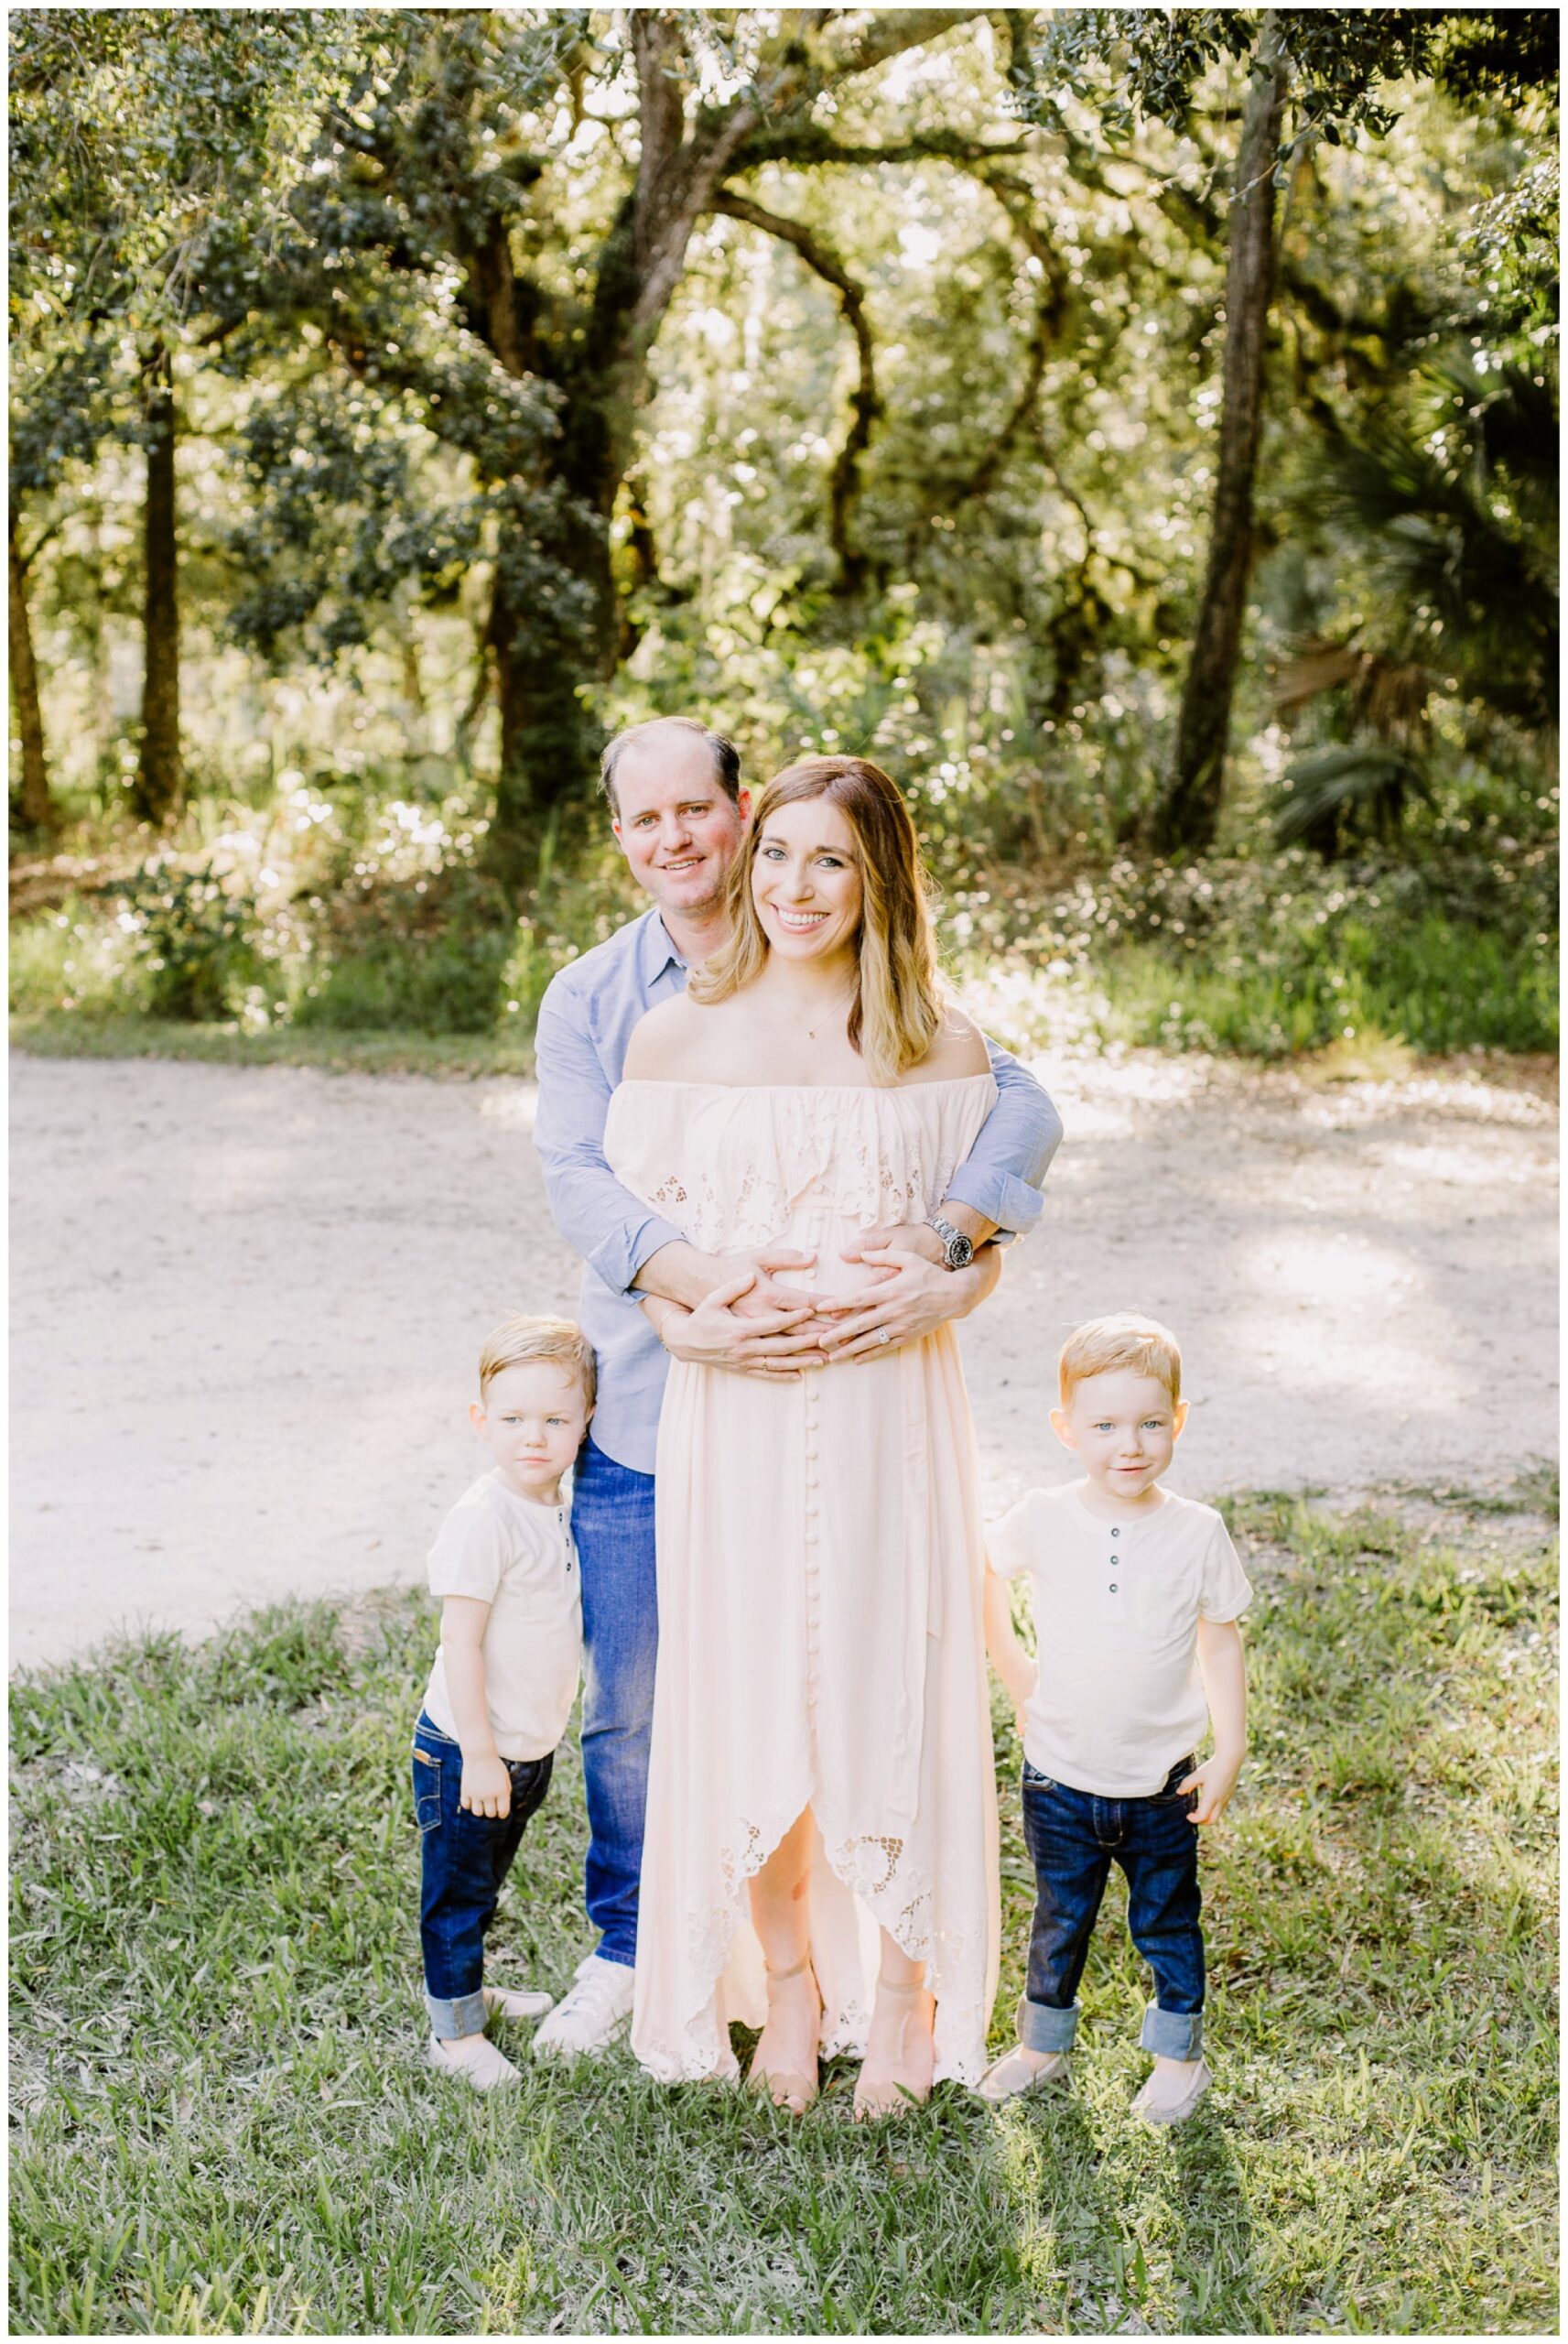 kimberly smith photography- south florida family photographers- south florida family photographer- family nature photo session- river bend park family photos | jupiter fl family photographers_0220.jpg